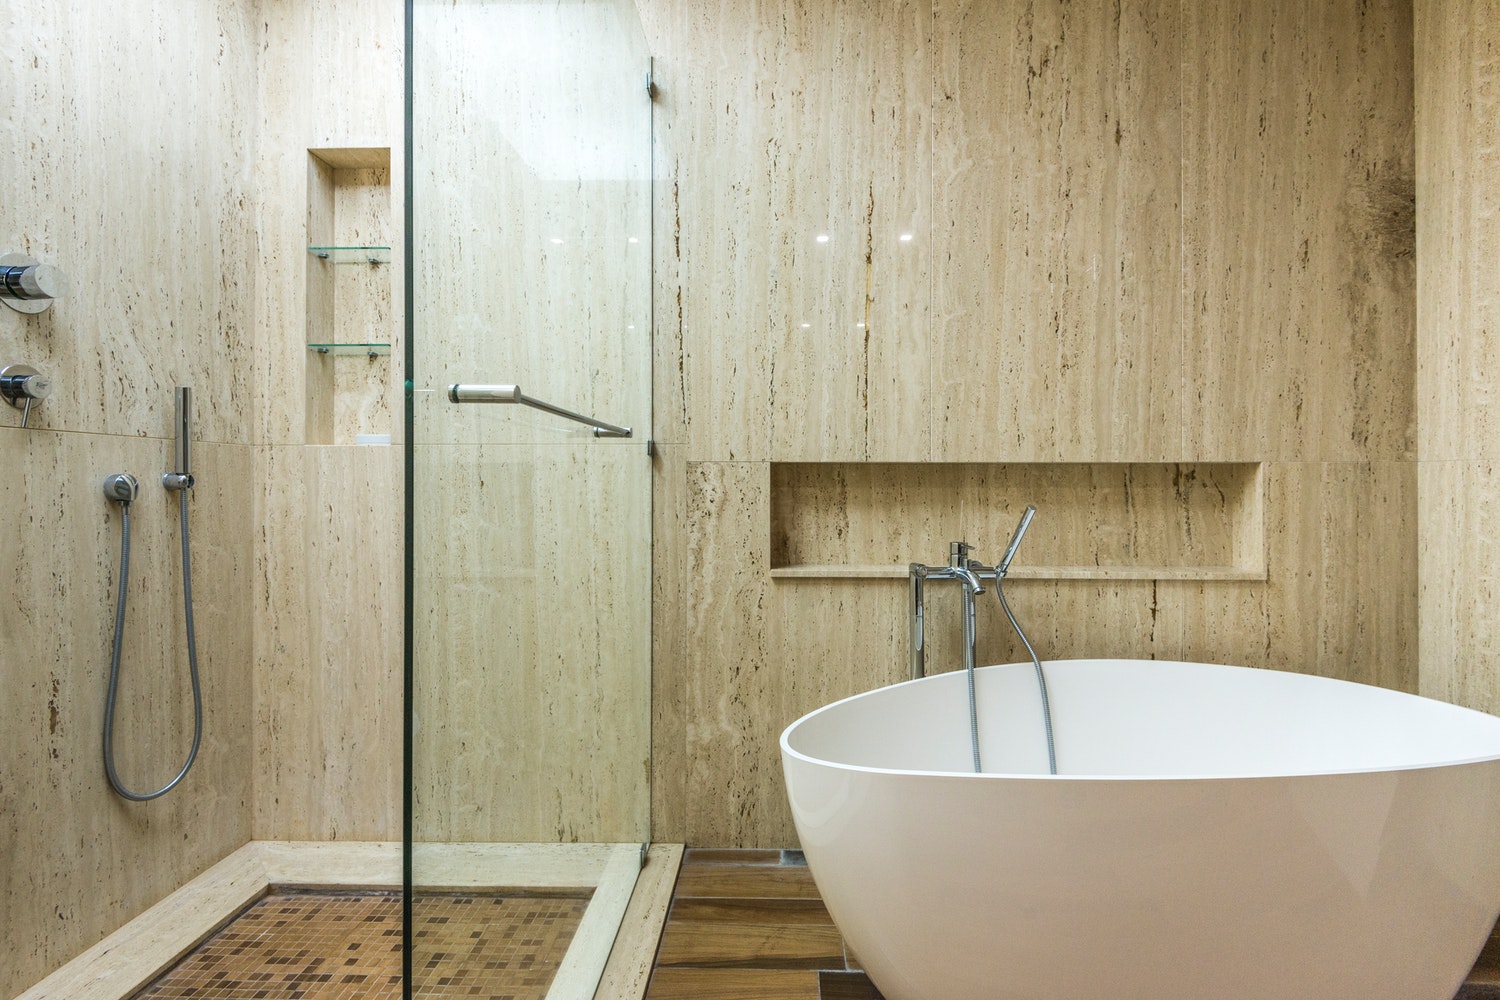 How to Choose a Bathroom Remodeling Contractor